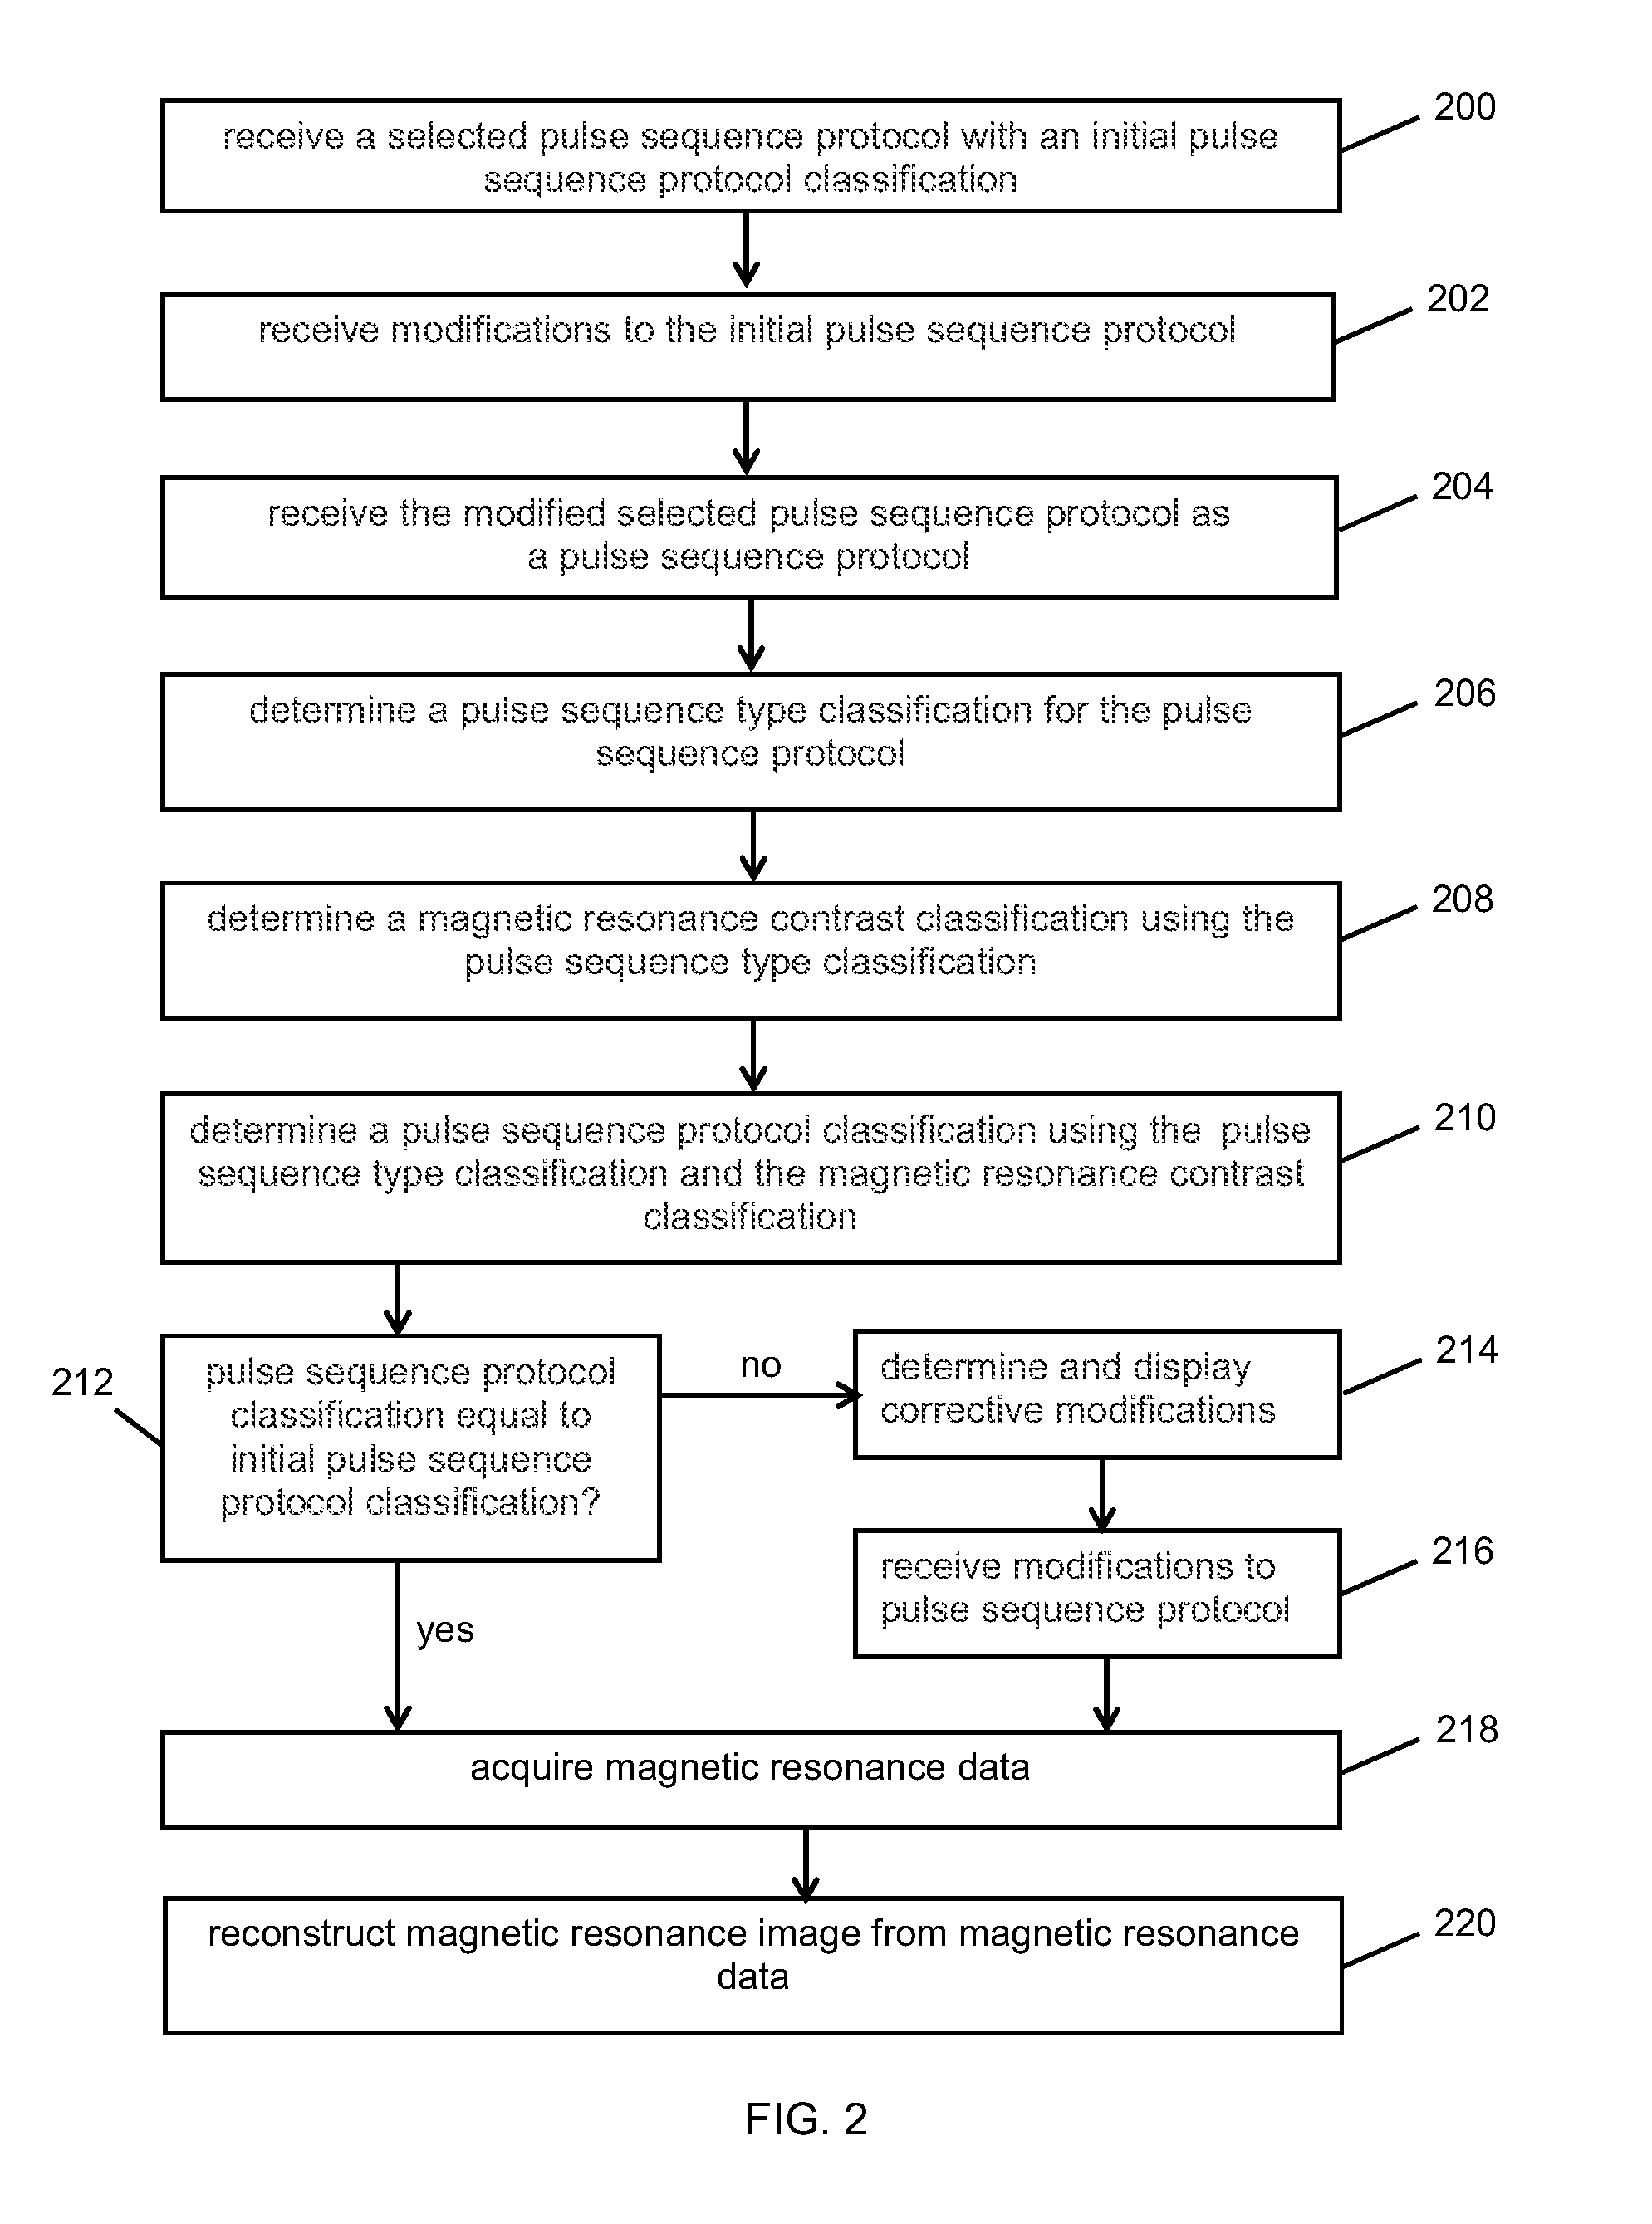 Determination of a magnetic resonance imaging pulse sequence protocol classification